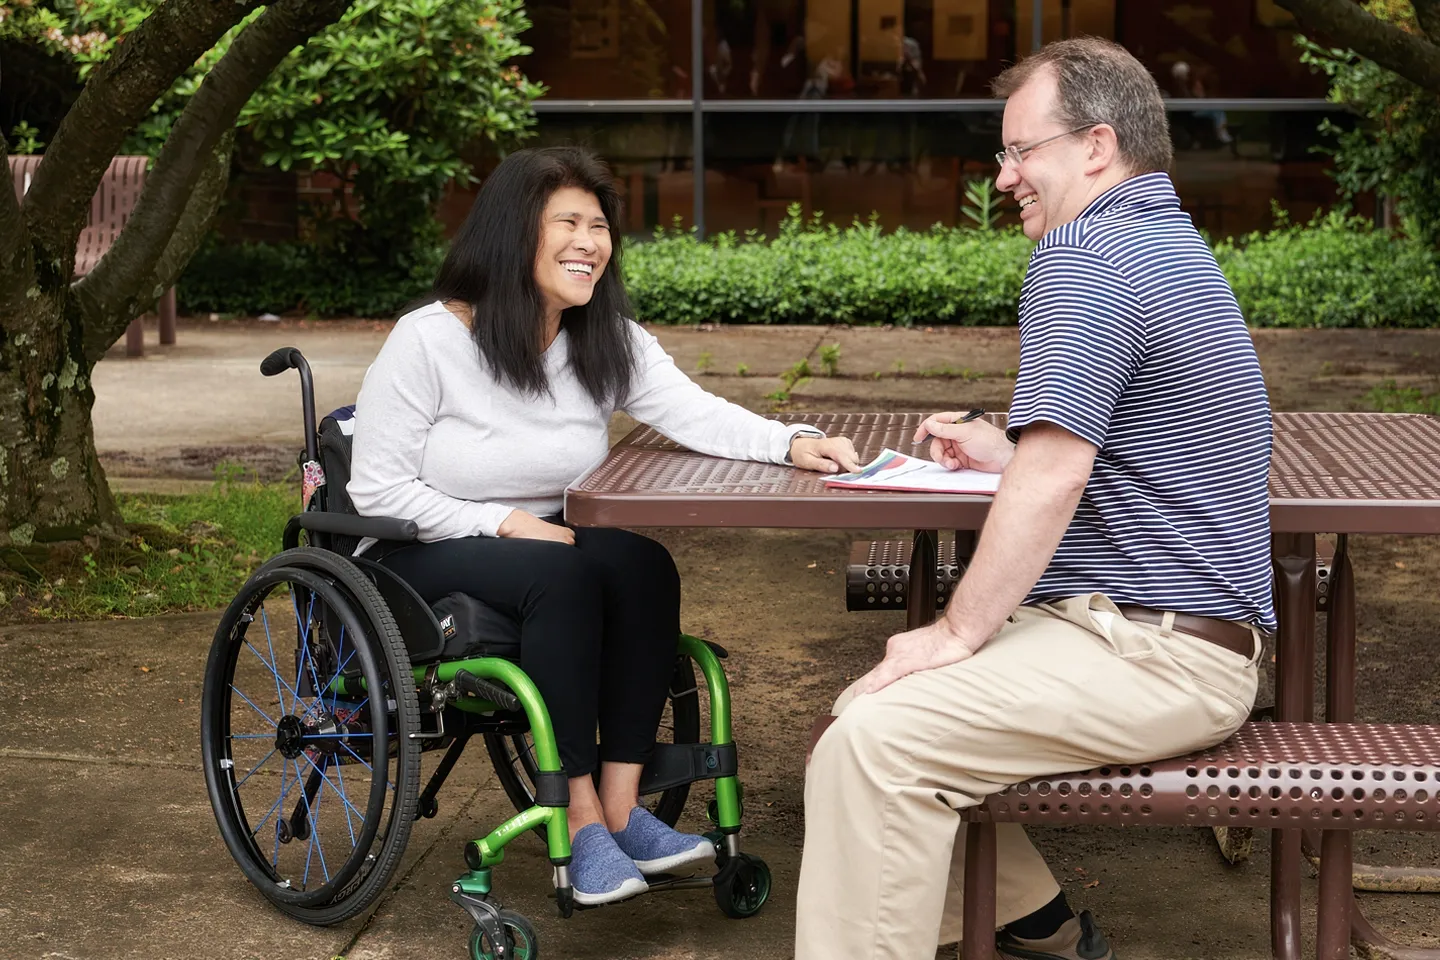 A woman is sitting in a wheelchair next to her male personal care assistant at an outside table surrounded by greenery. Both are smiling broadly.